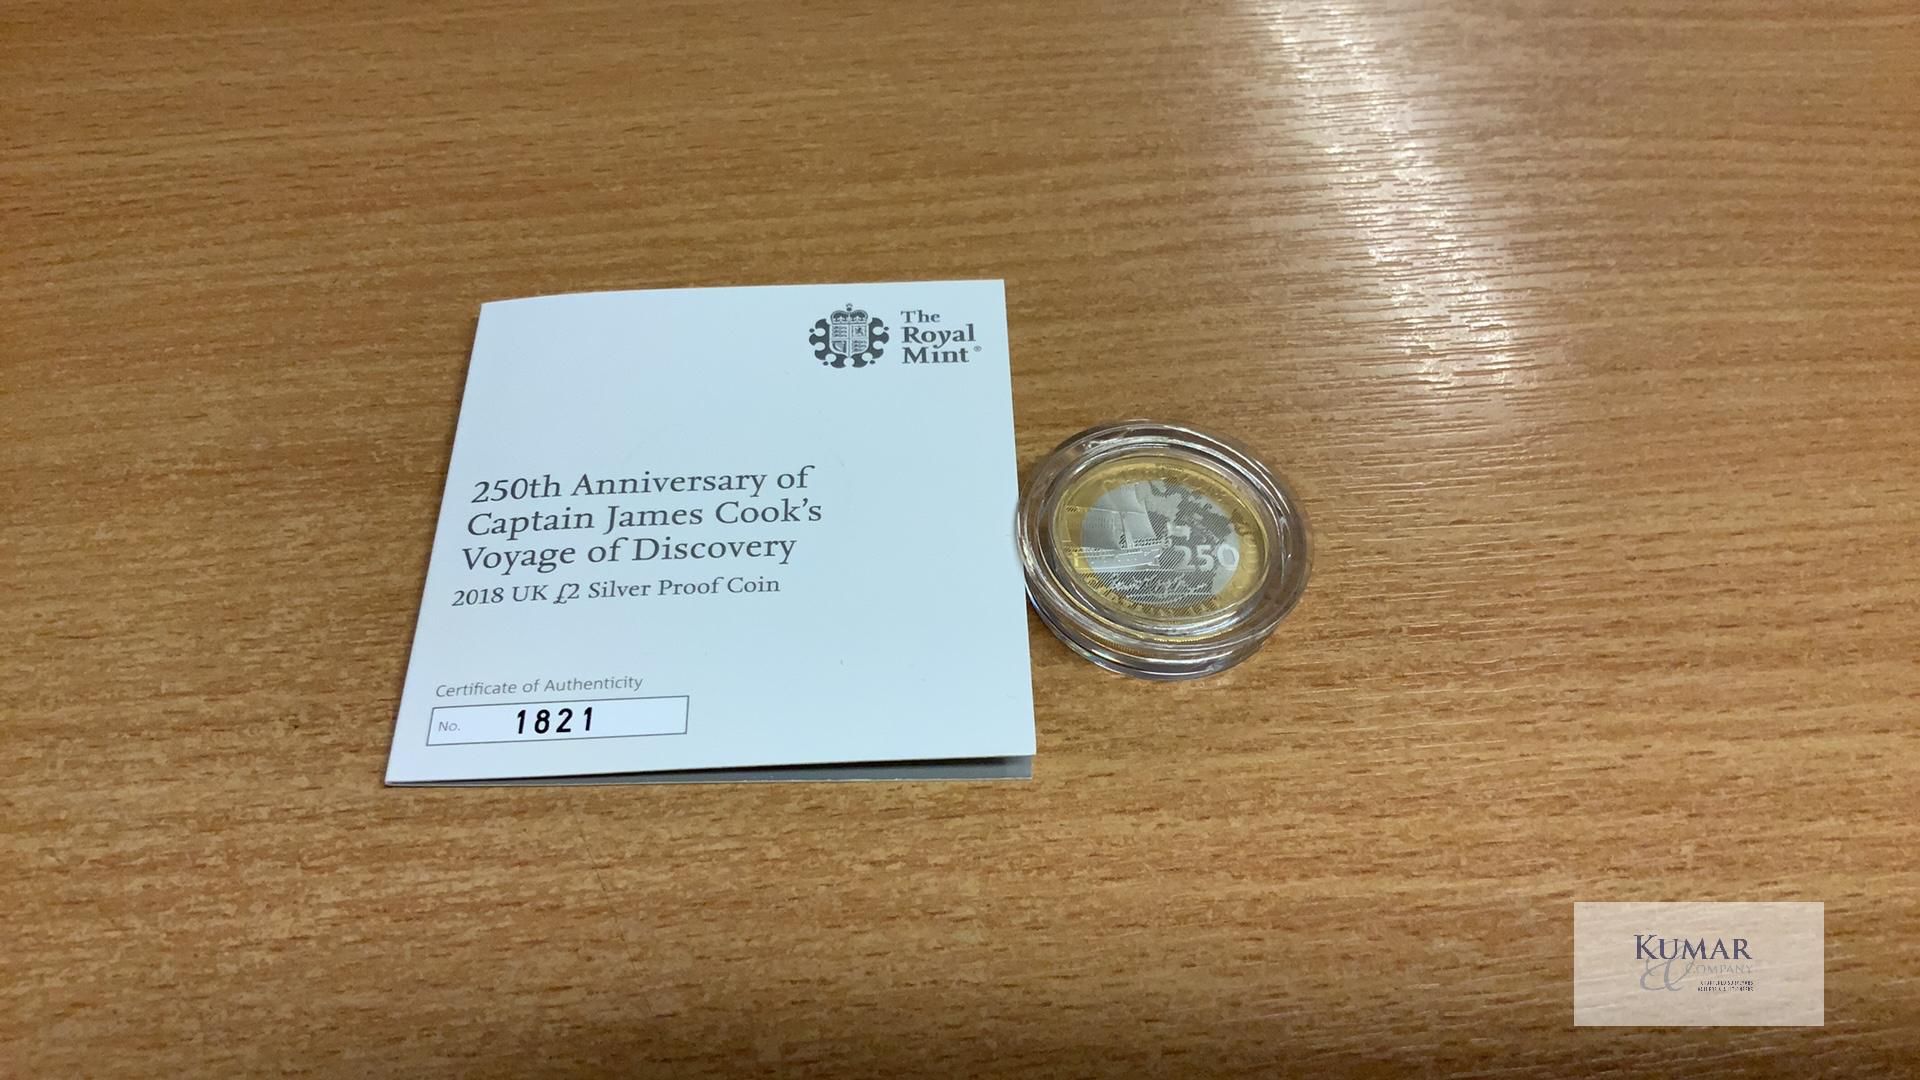 The Royal Mint Coin- Voyage of Discovery - Coin II - 1768 250th Anniversary of Captain James Cooks - Image 3 of 4